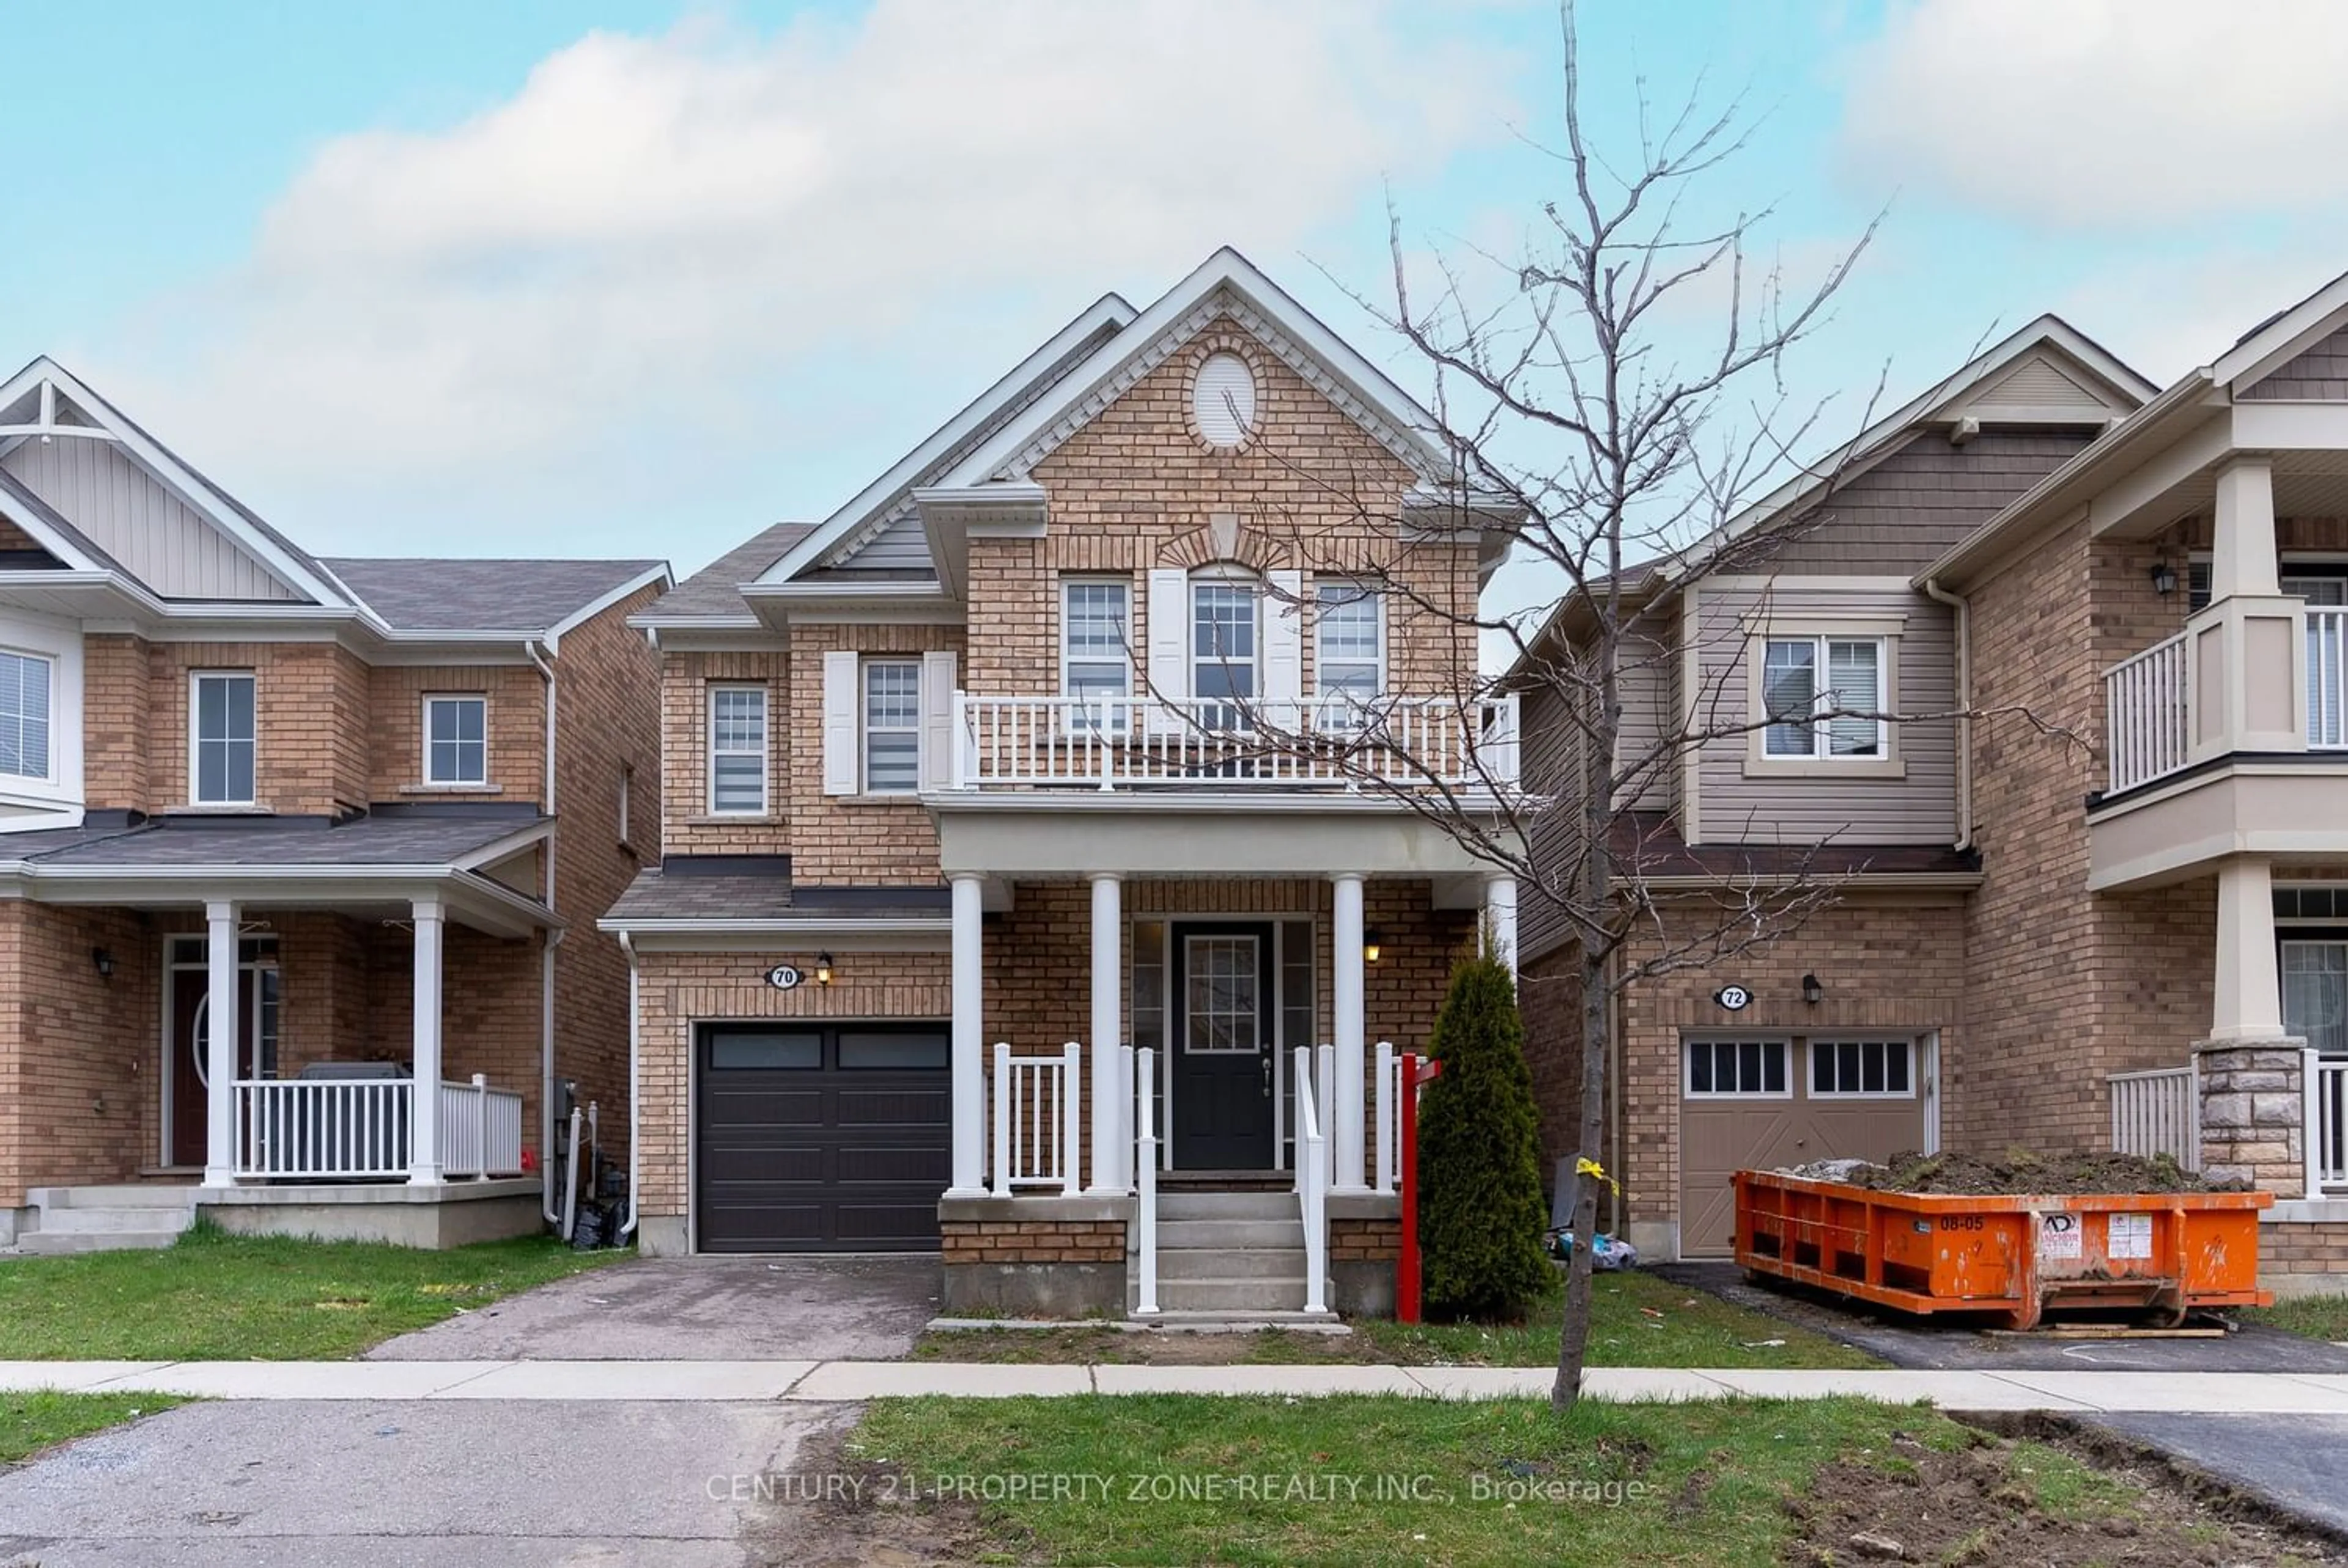 Home with brick exterior material for 70 Stedford Cres, Brampton Ontario L7A 0G4